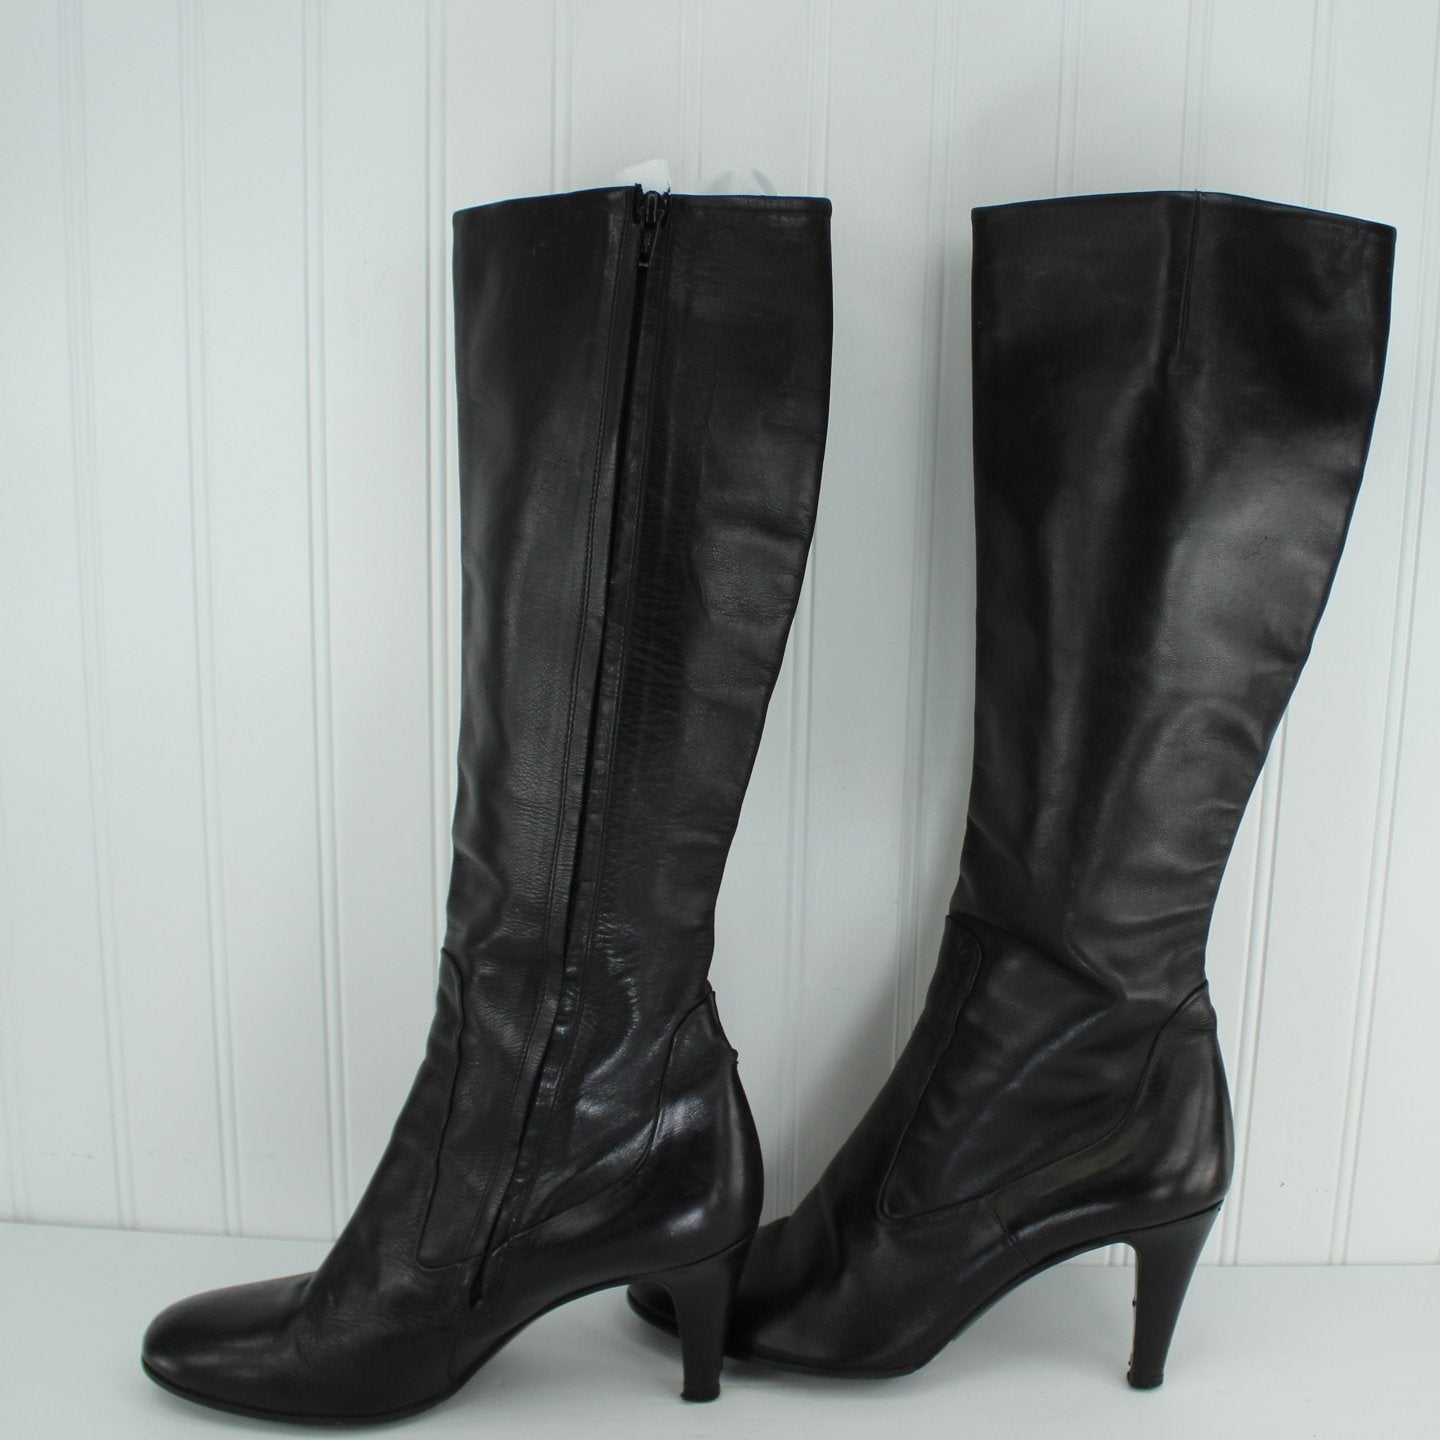 Black Leather Boots Women's 40 Italy Great Pre Owned great condition